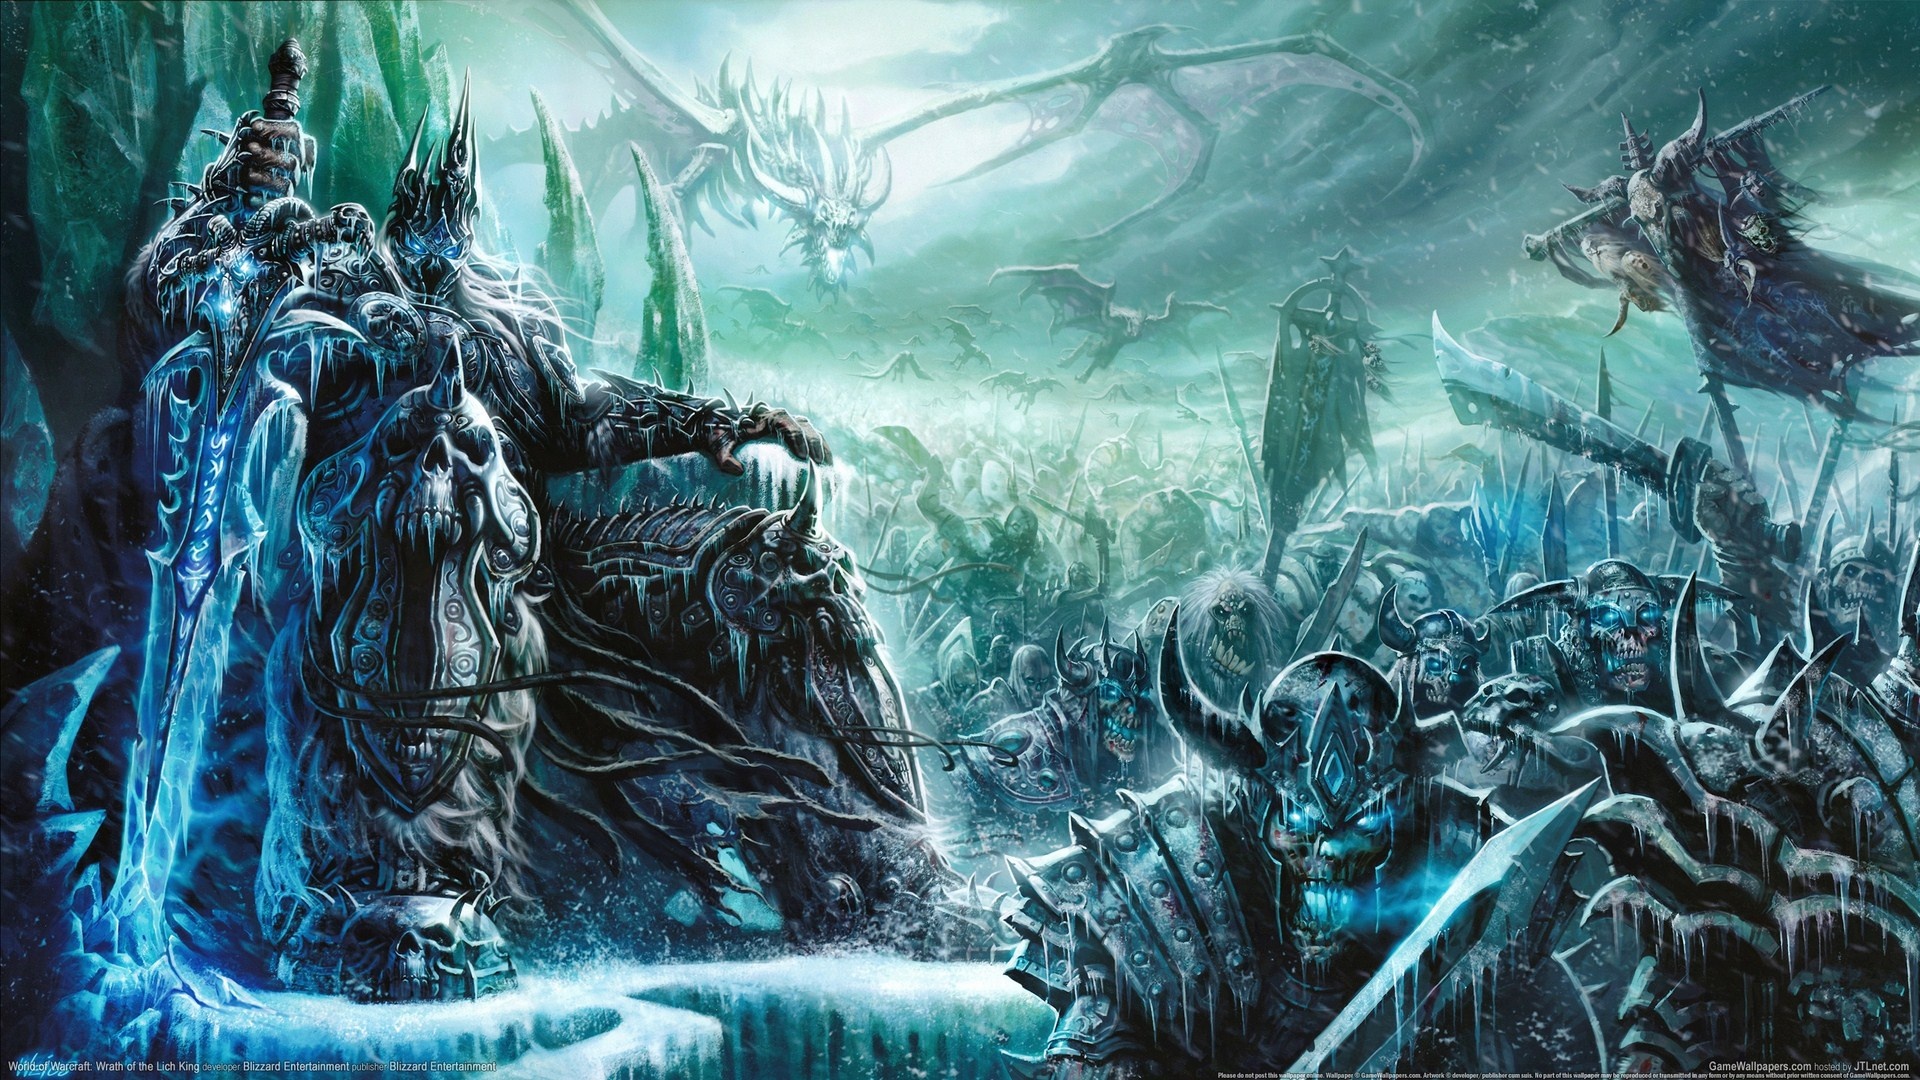 HQ World Of Warcraft: Wrath Of The Lich King Wallpapers | File 900.49Kb